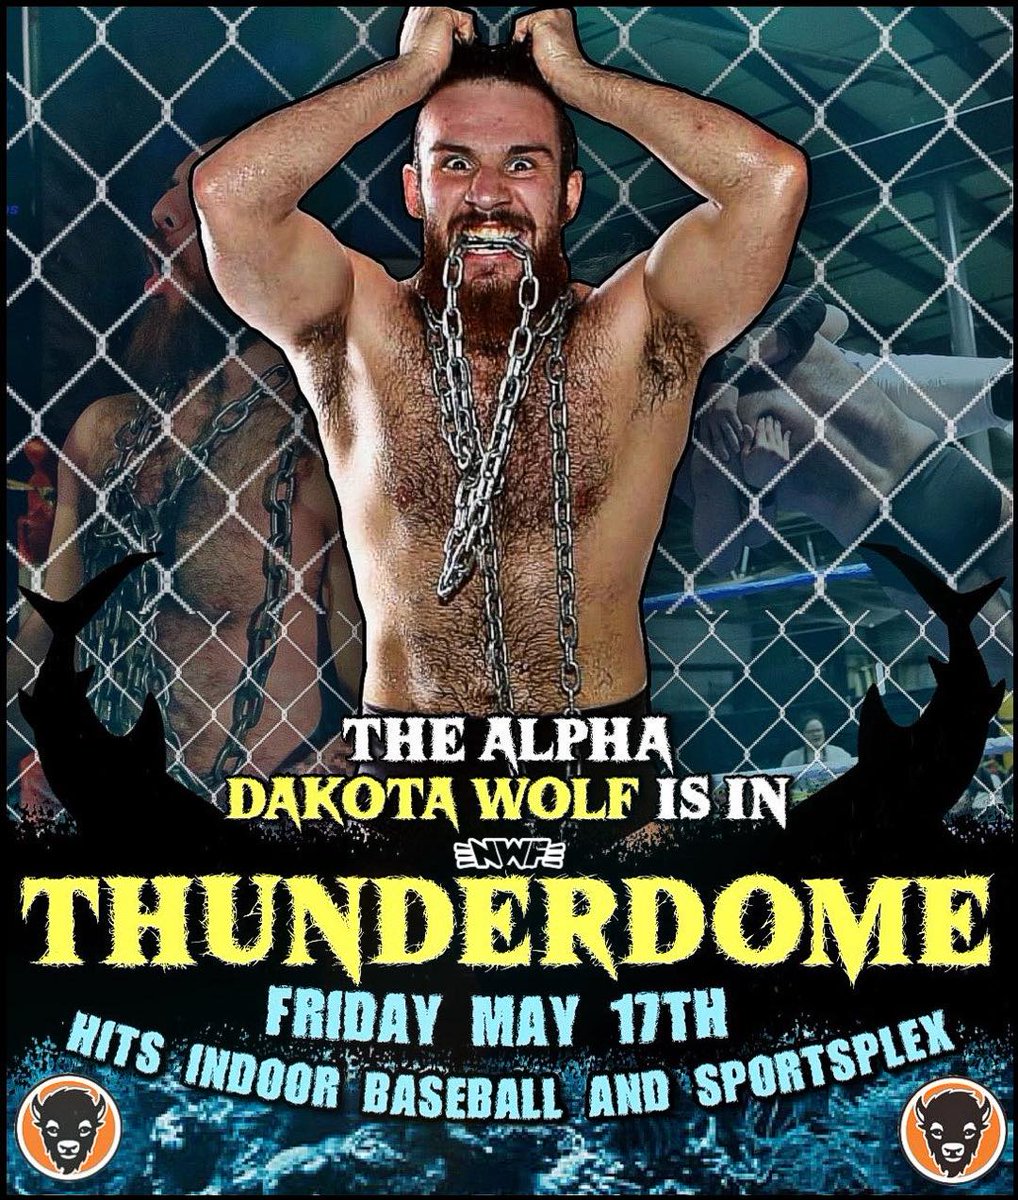 🚨 DAKOTA WOLF HAS BEEN ENTERED IN THUNDERDOME! 🚨 Entering his first ever Thunderdome match, or cage match for that matter, @DakotaWolfe78 looks to decimate 7 other superstars and become the new NWF Champion on May 17th at Hits! 🎟: nwfwrestling.com/events